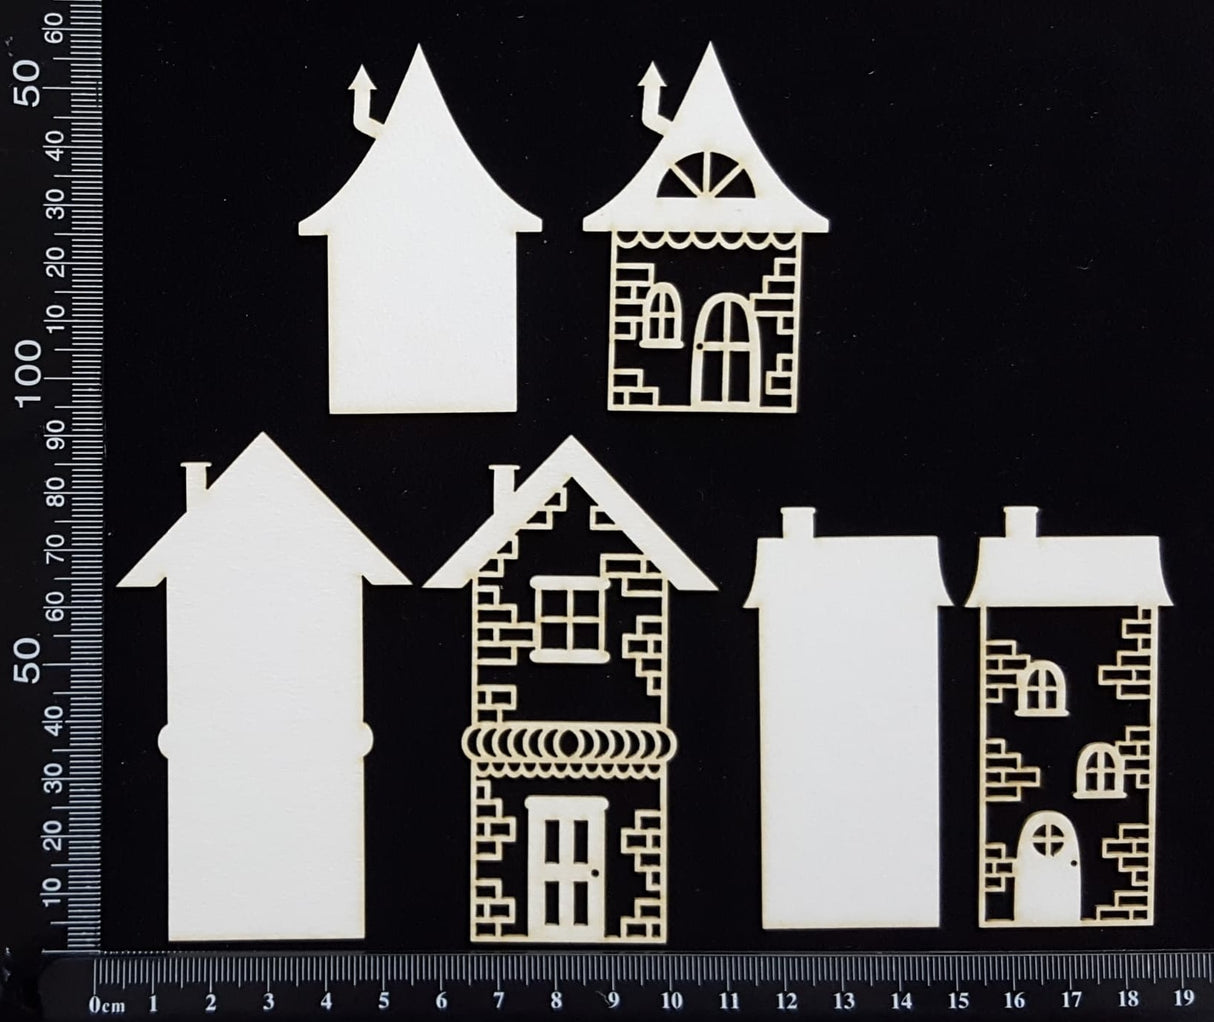 Layered Detailed House Set - L - Small - White Chipboard